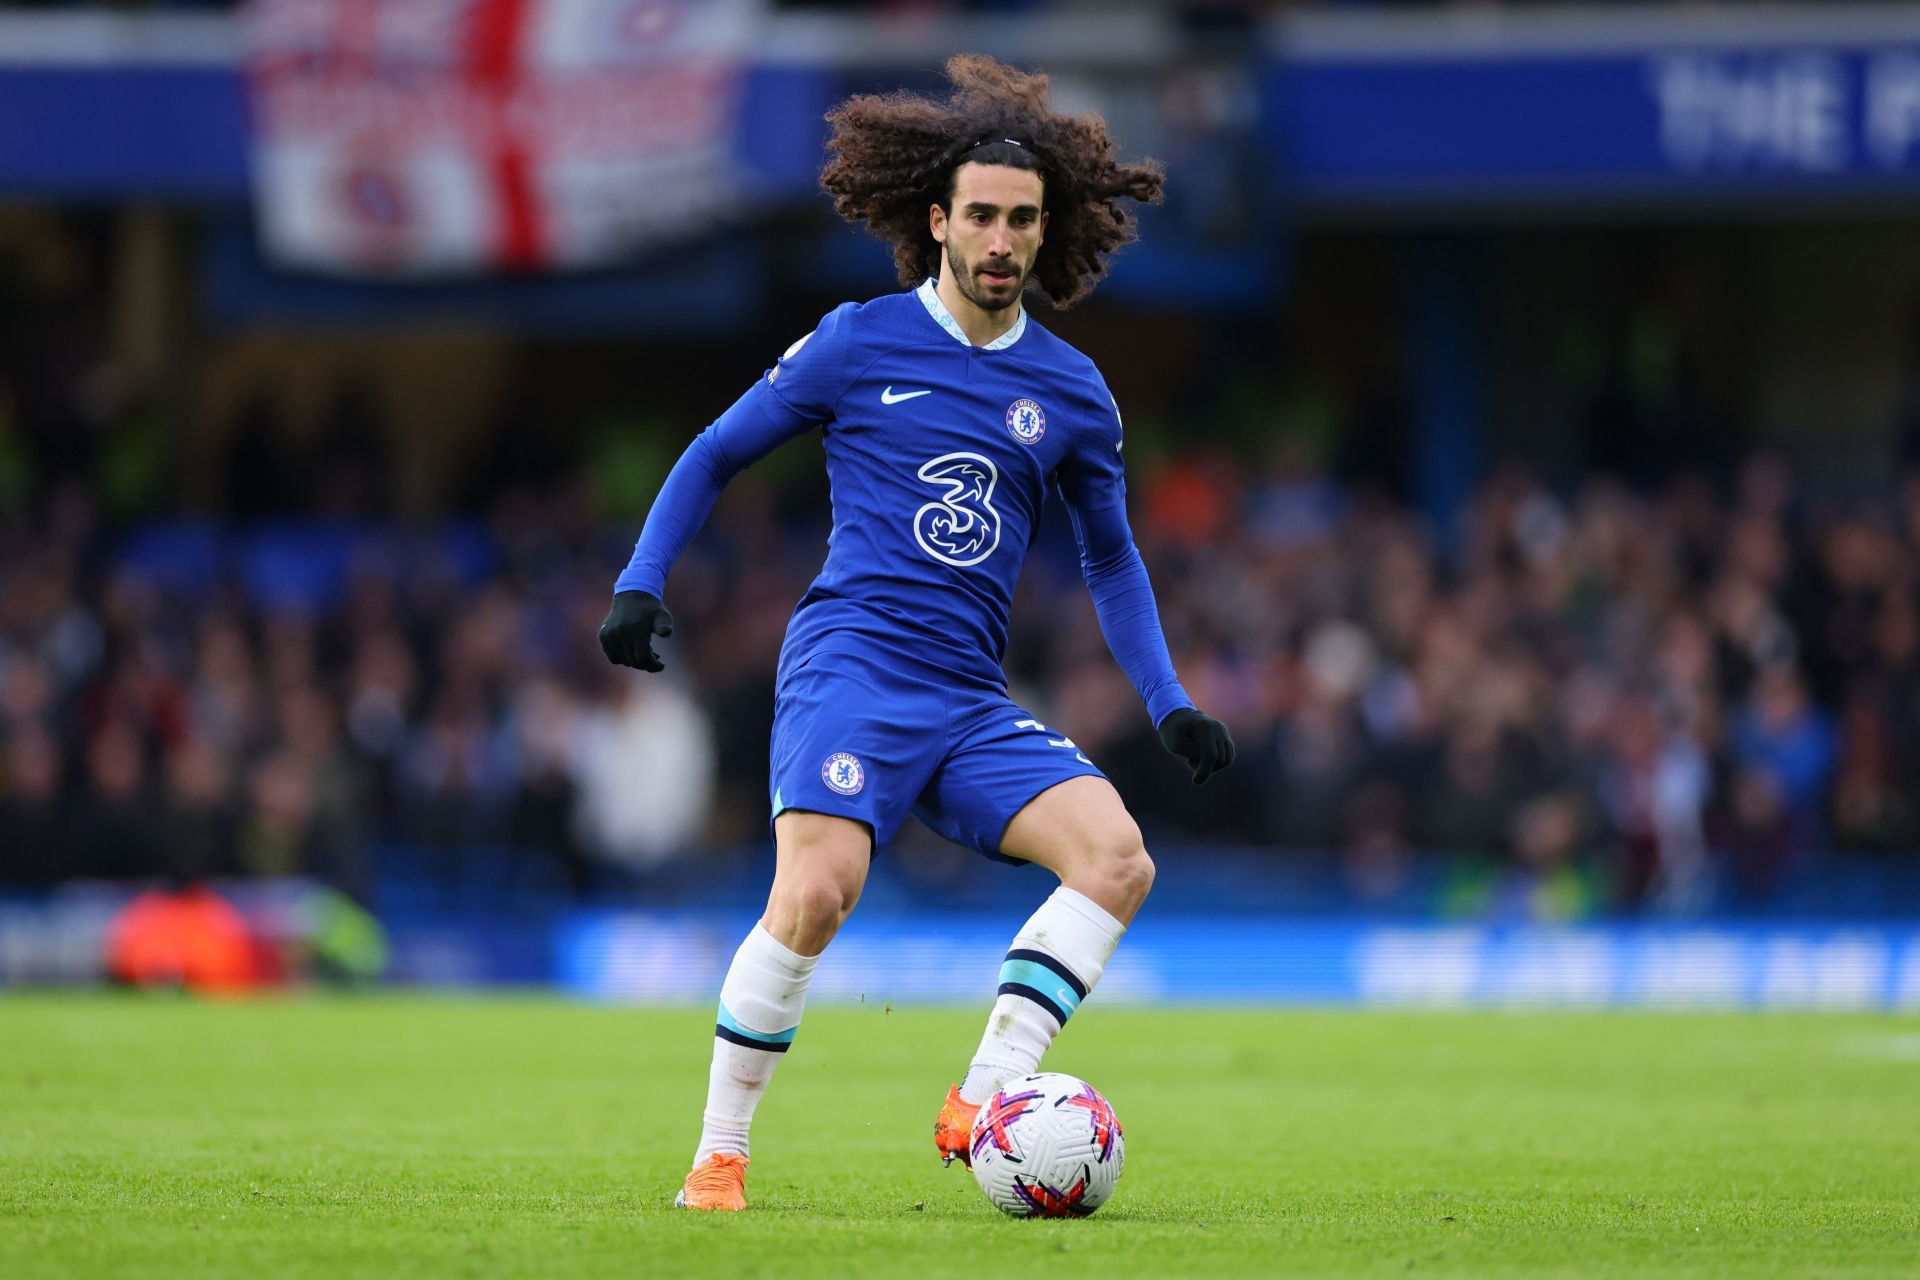 Cucurella is expected to make a move to United this summer.